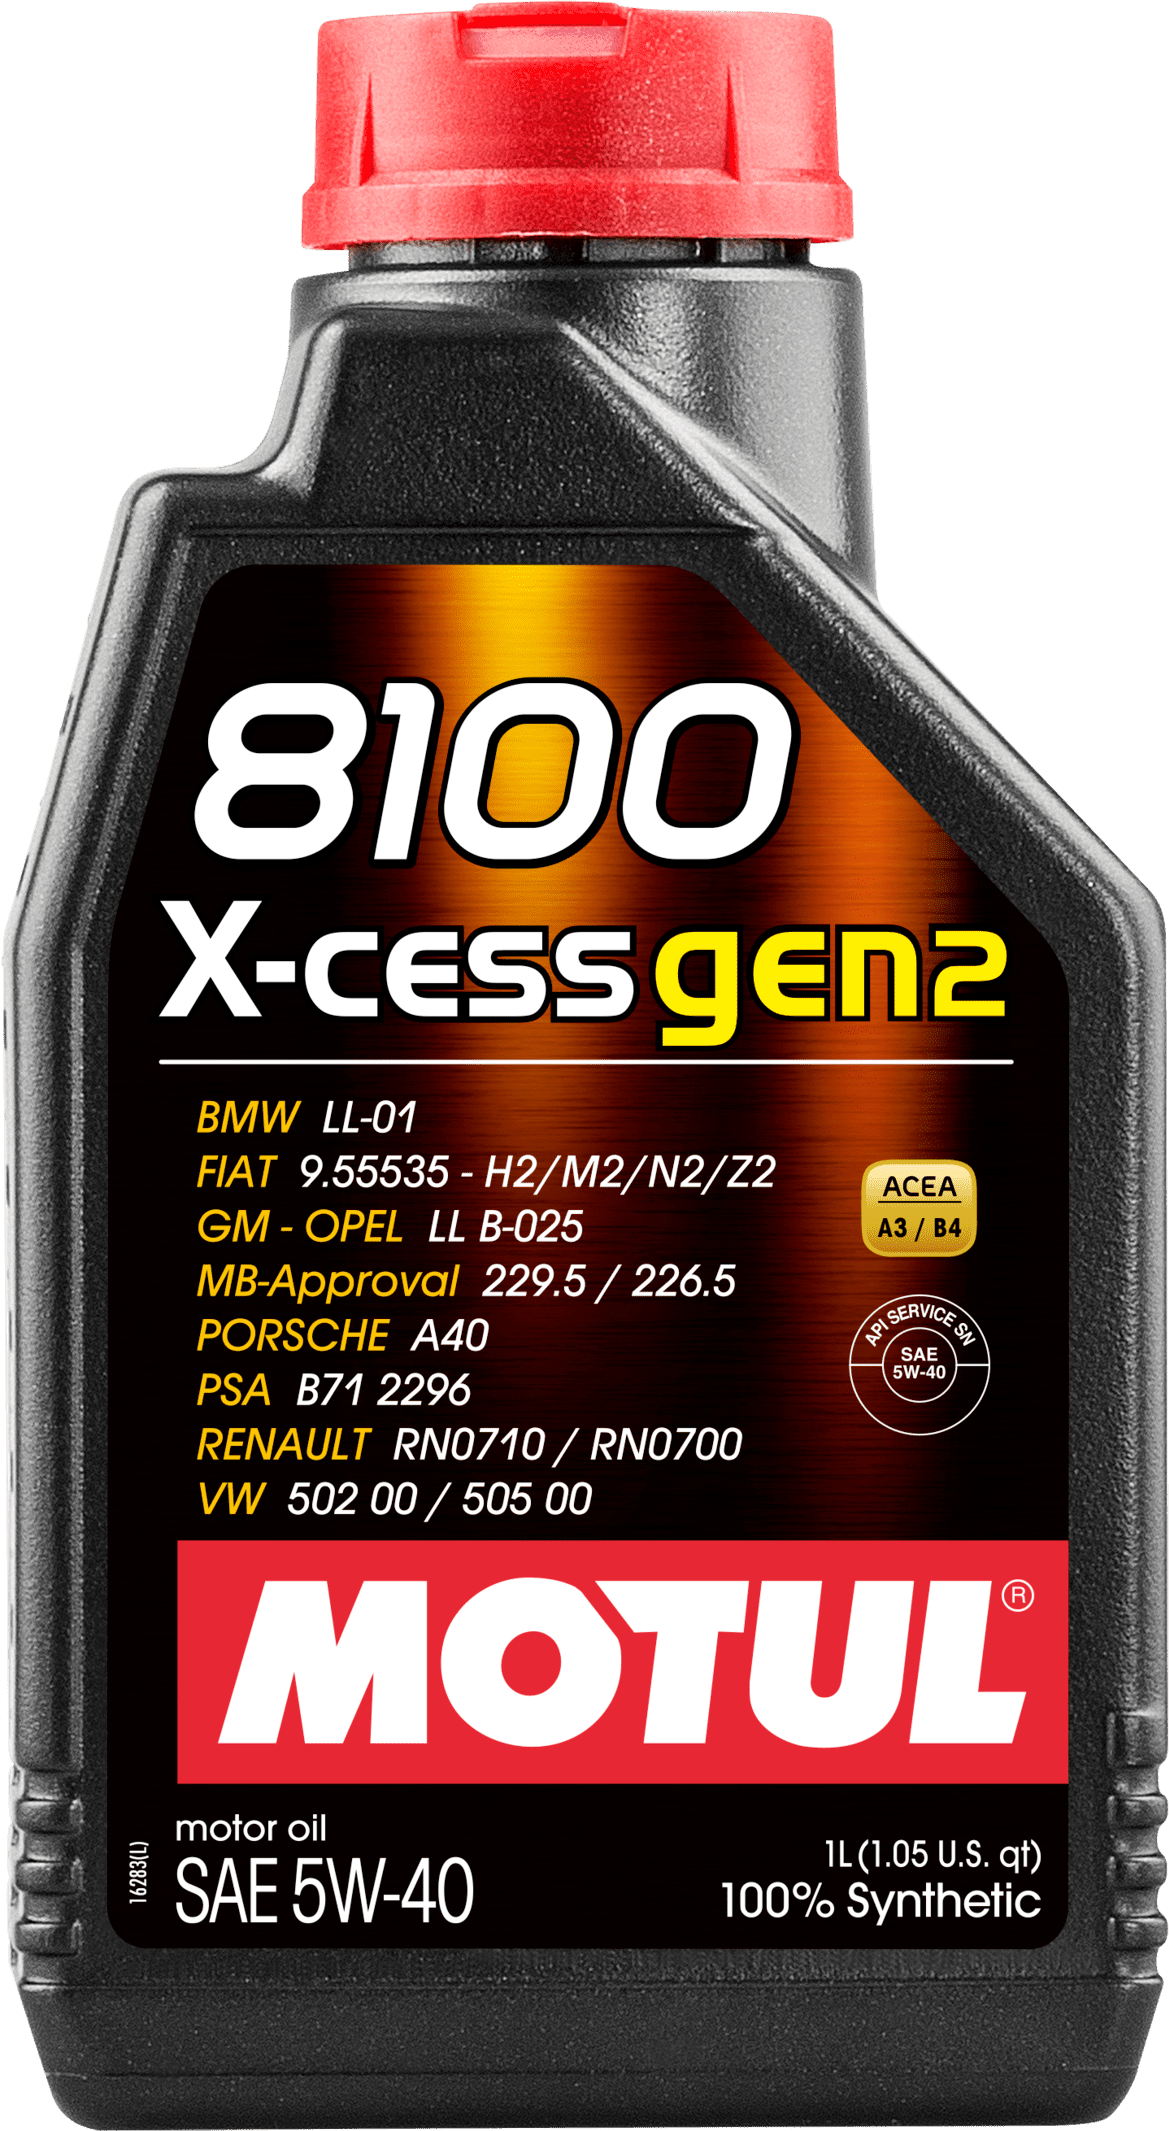 109774-1 High performance 100% Synthetic lubricant specifically designed for powerful and recent cars fitted with large displacement engines, Gasoline and Diesel, naturally aspirated or turbocharged, indirect or direct injection.